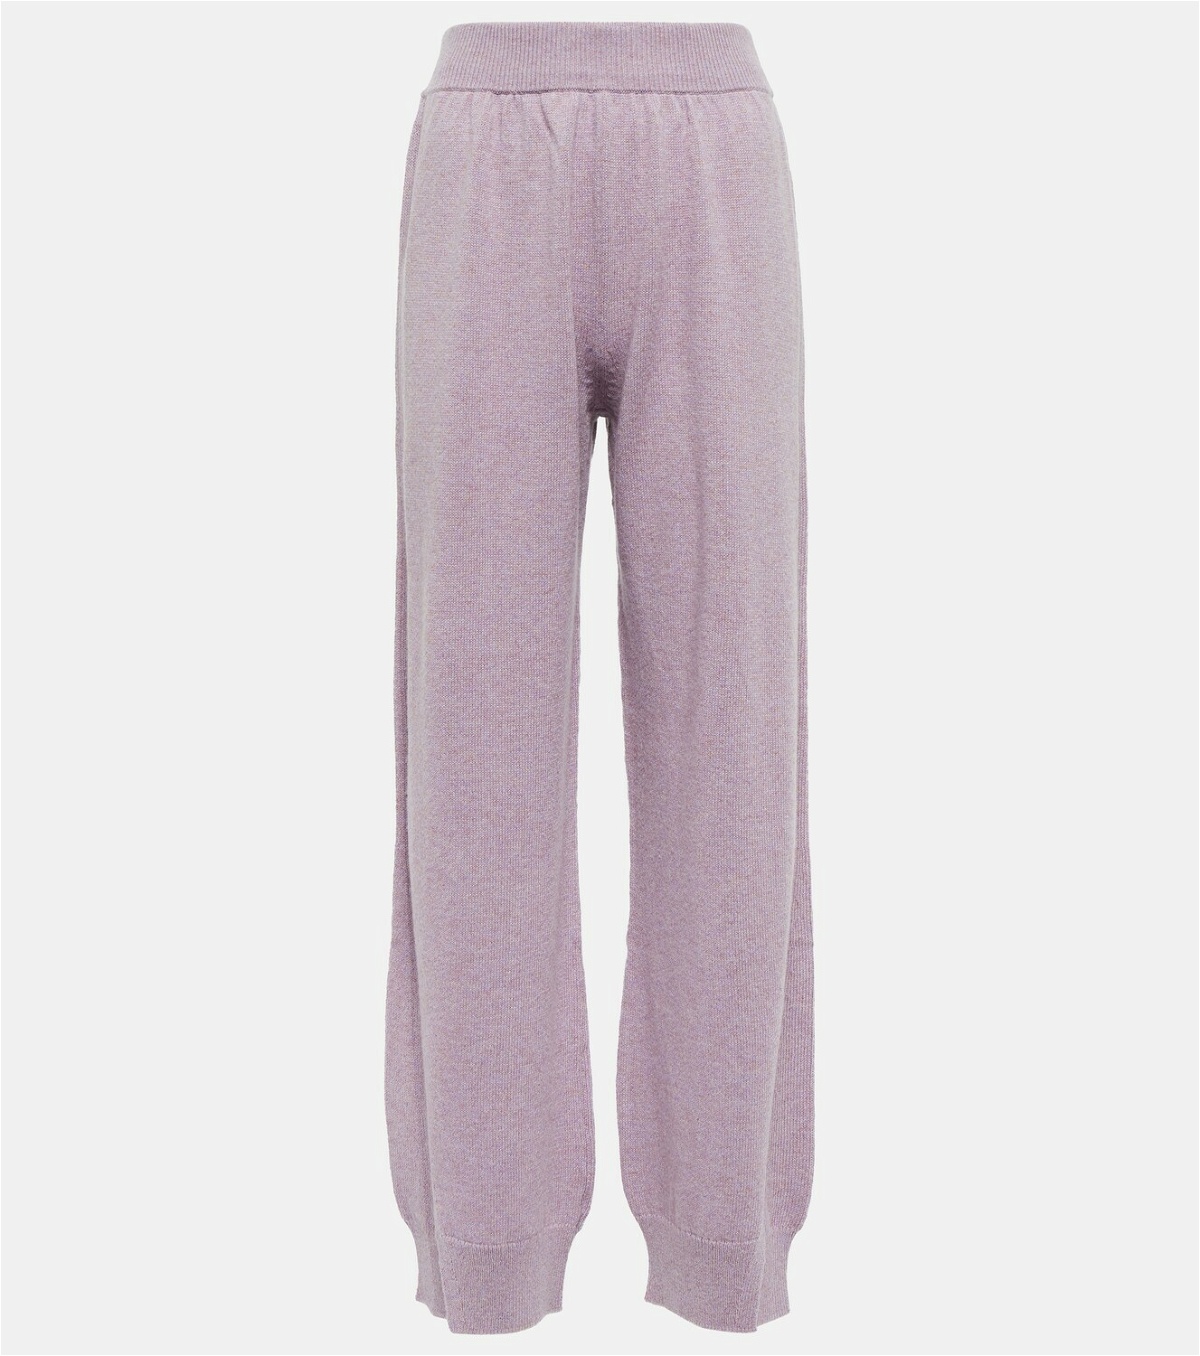 Barrie High-rise cashmere knit sweatpants